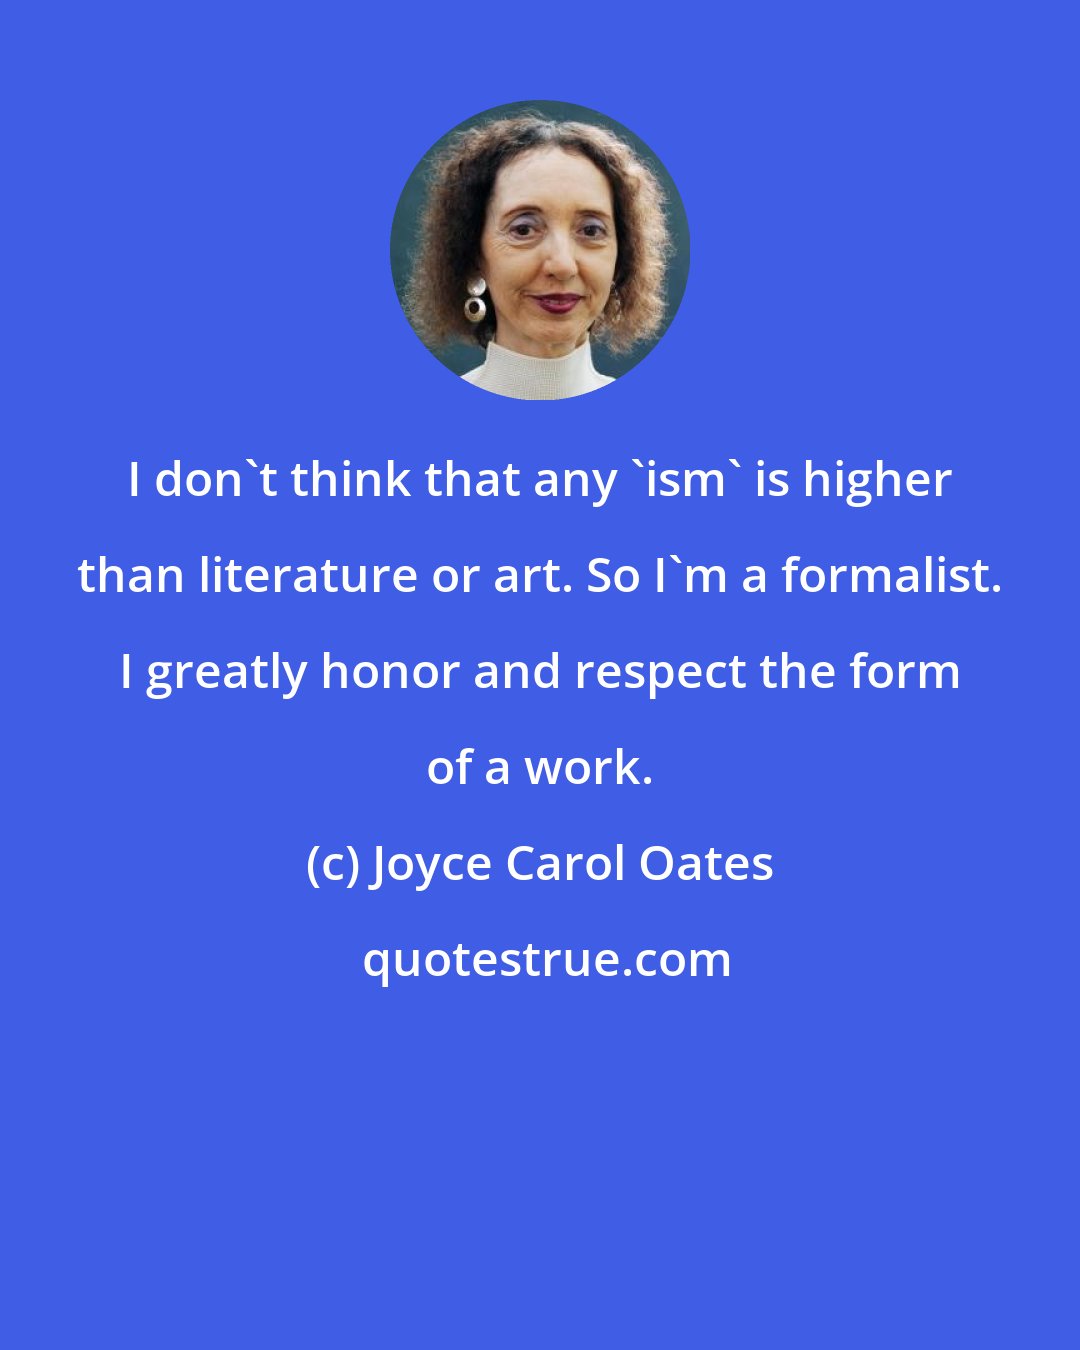 Joyce Carol Oates: I don't think that any 'ism' is higher than literature or art. So I'm a formalist. I greatly honor and respect the form of a work.